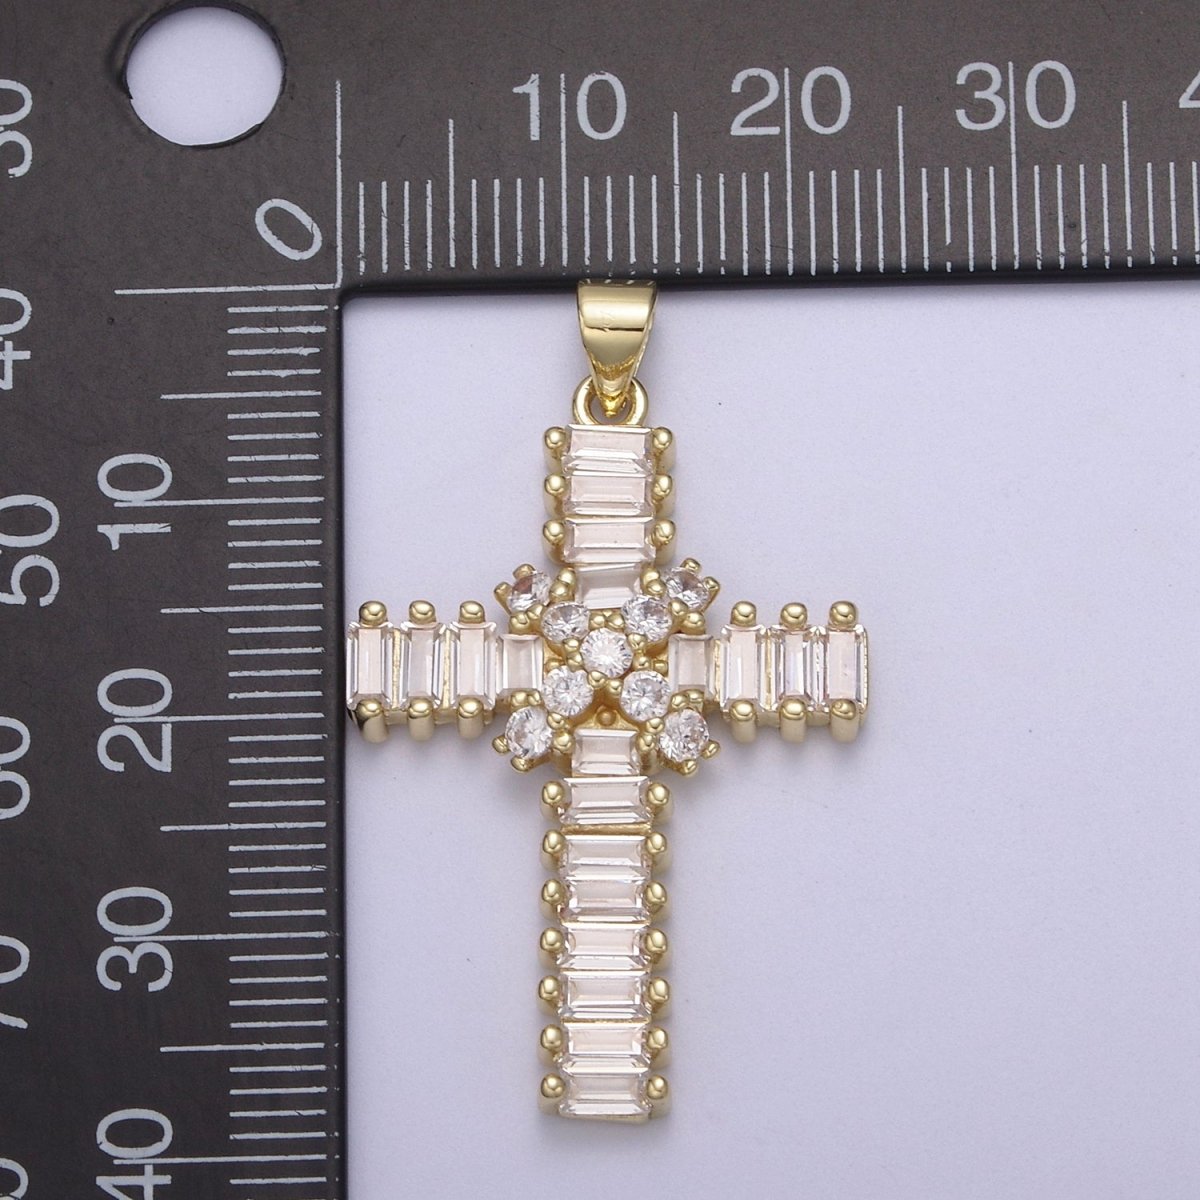 Clear Baguette Cubic Zirconia Cross Pendant, 14K Gold Filled Christian Catholic Supply For DIY Jewelry Making H-777 - DLUXCA